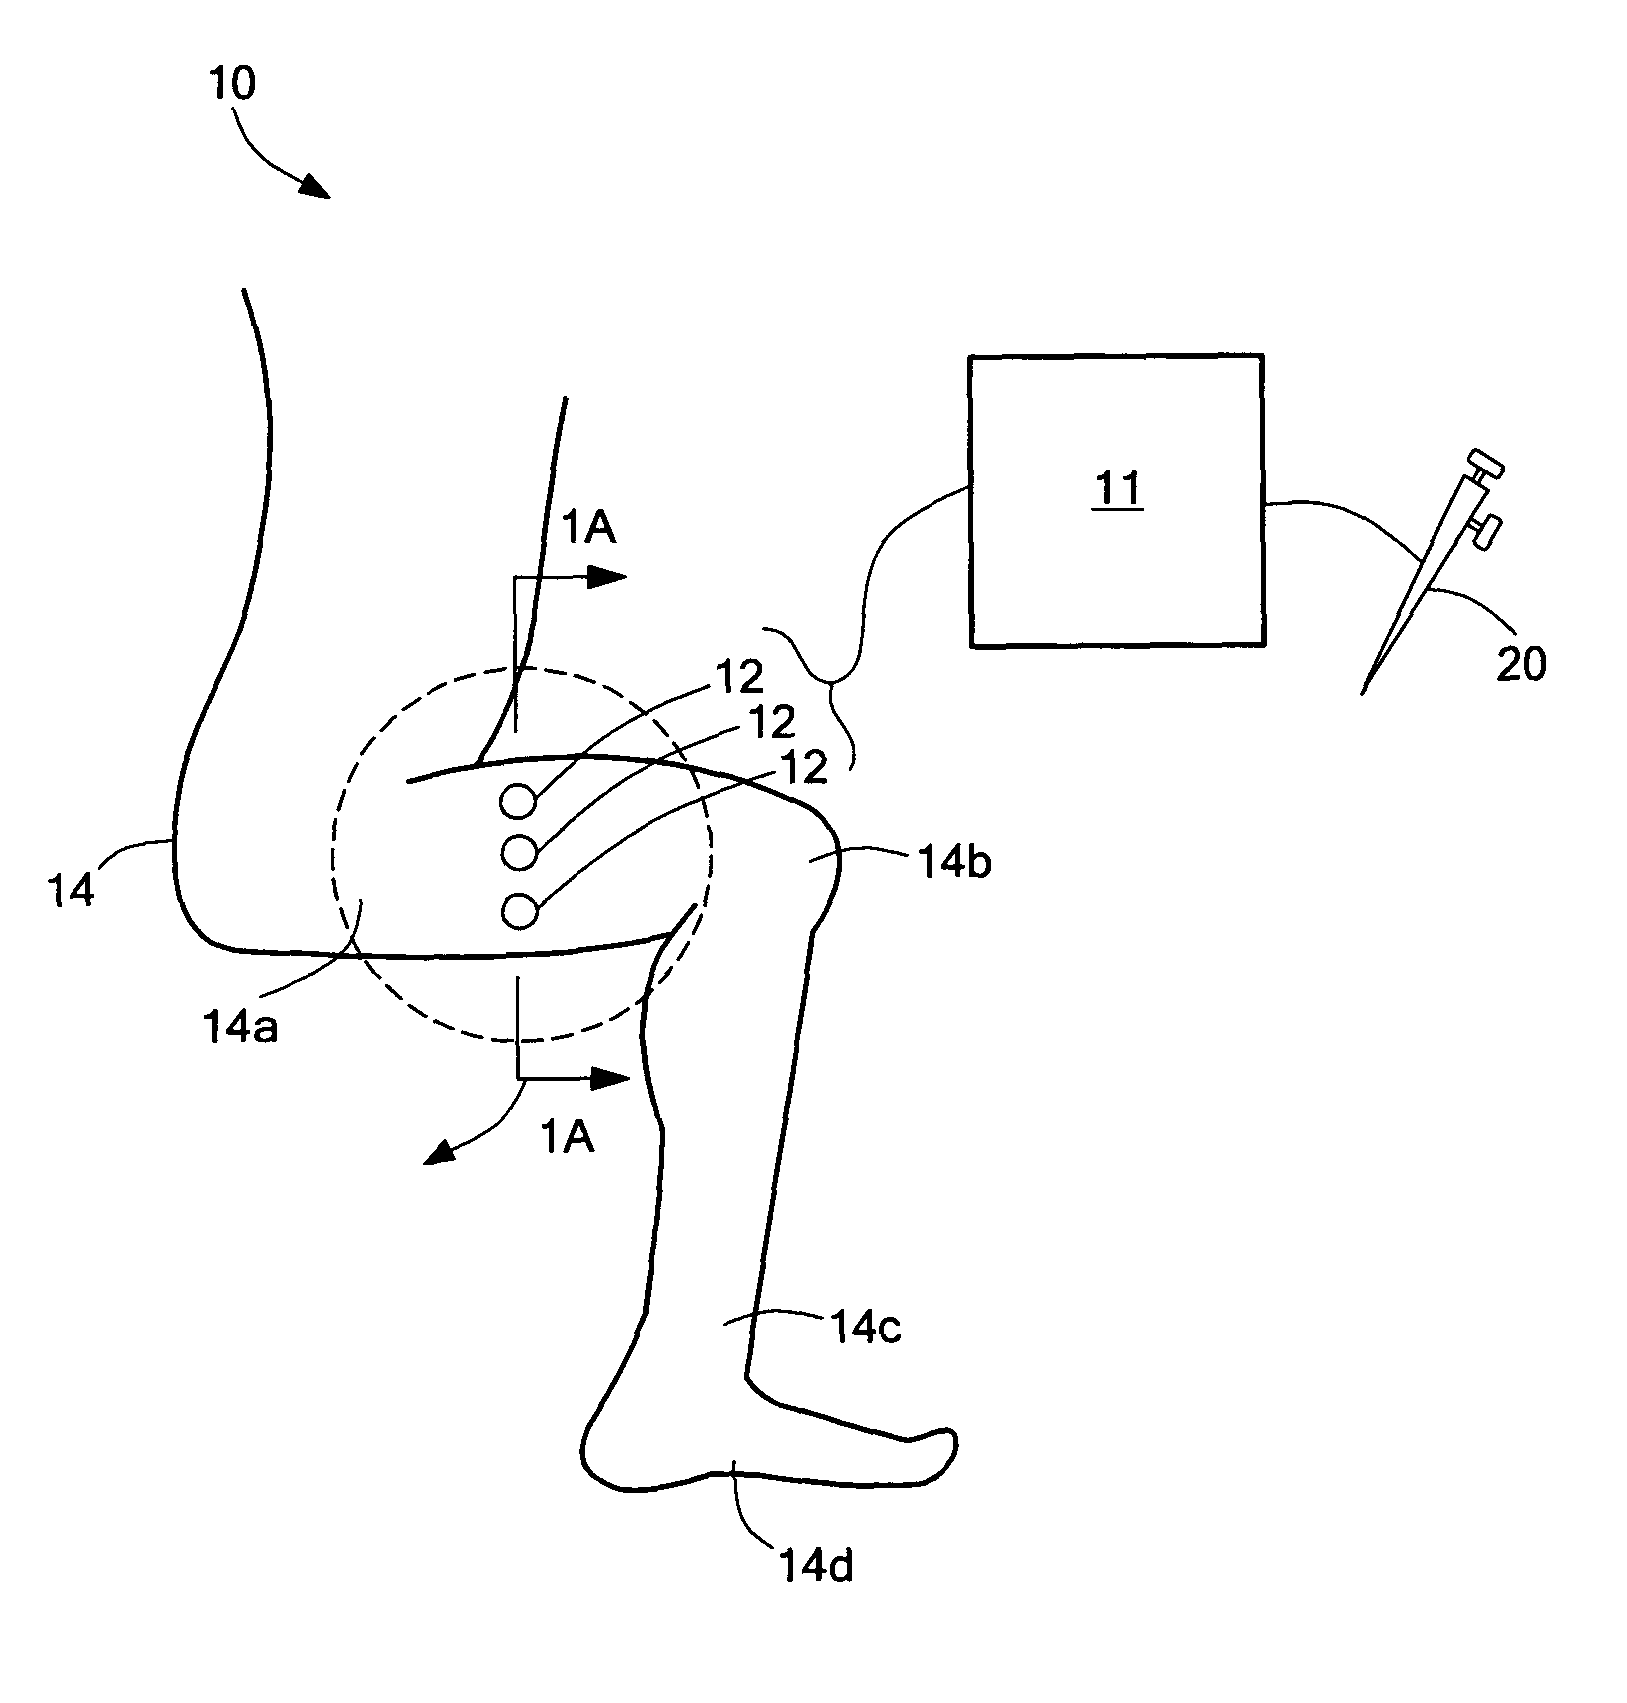 Interactive system and method for peripheral nerve mapping and blocking